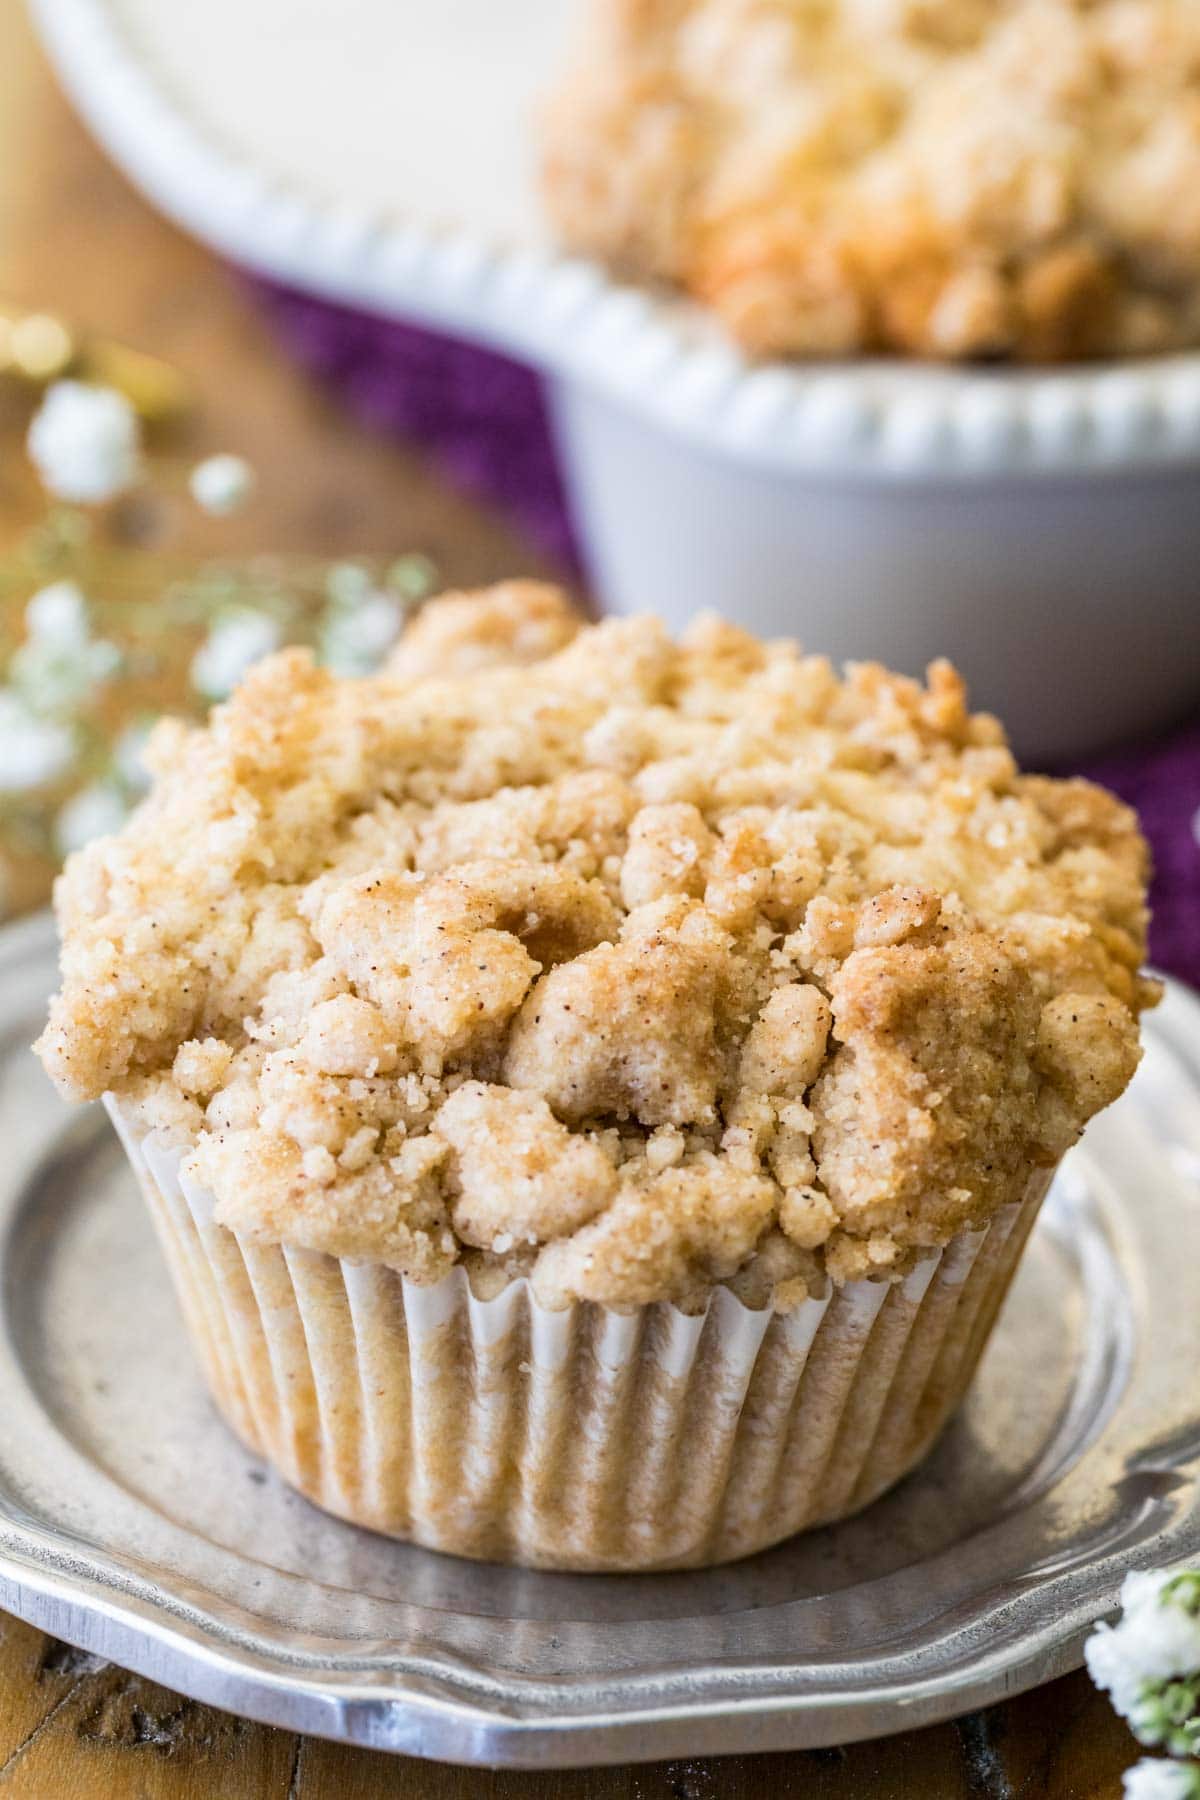 Crumb topping piled on a muffin.